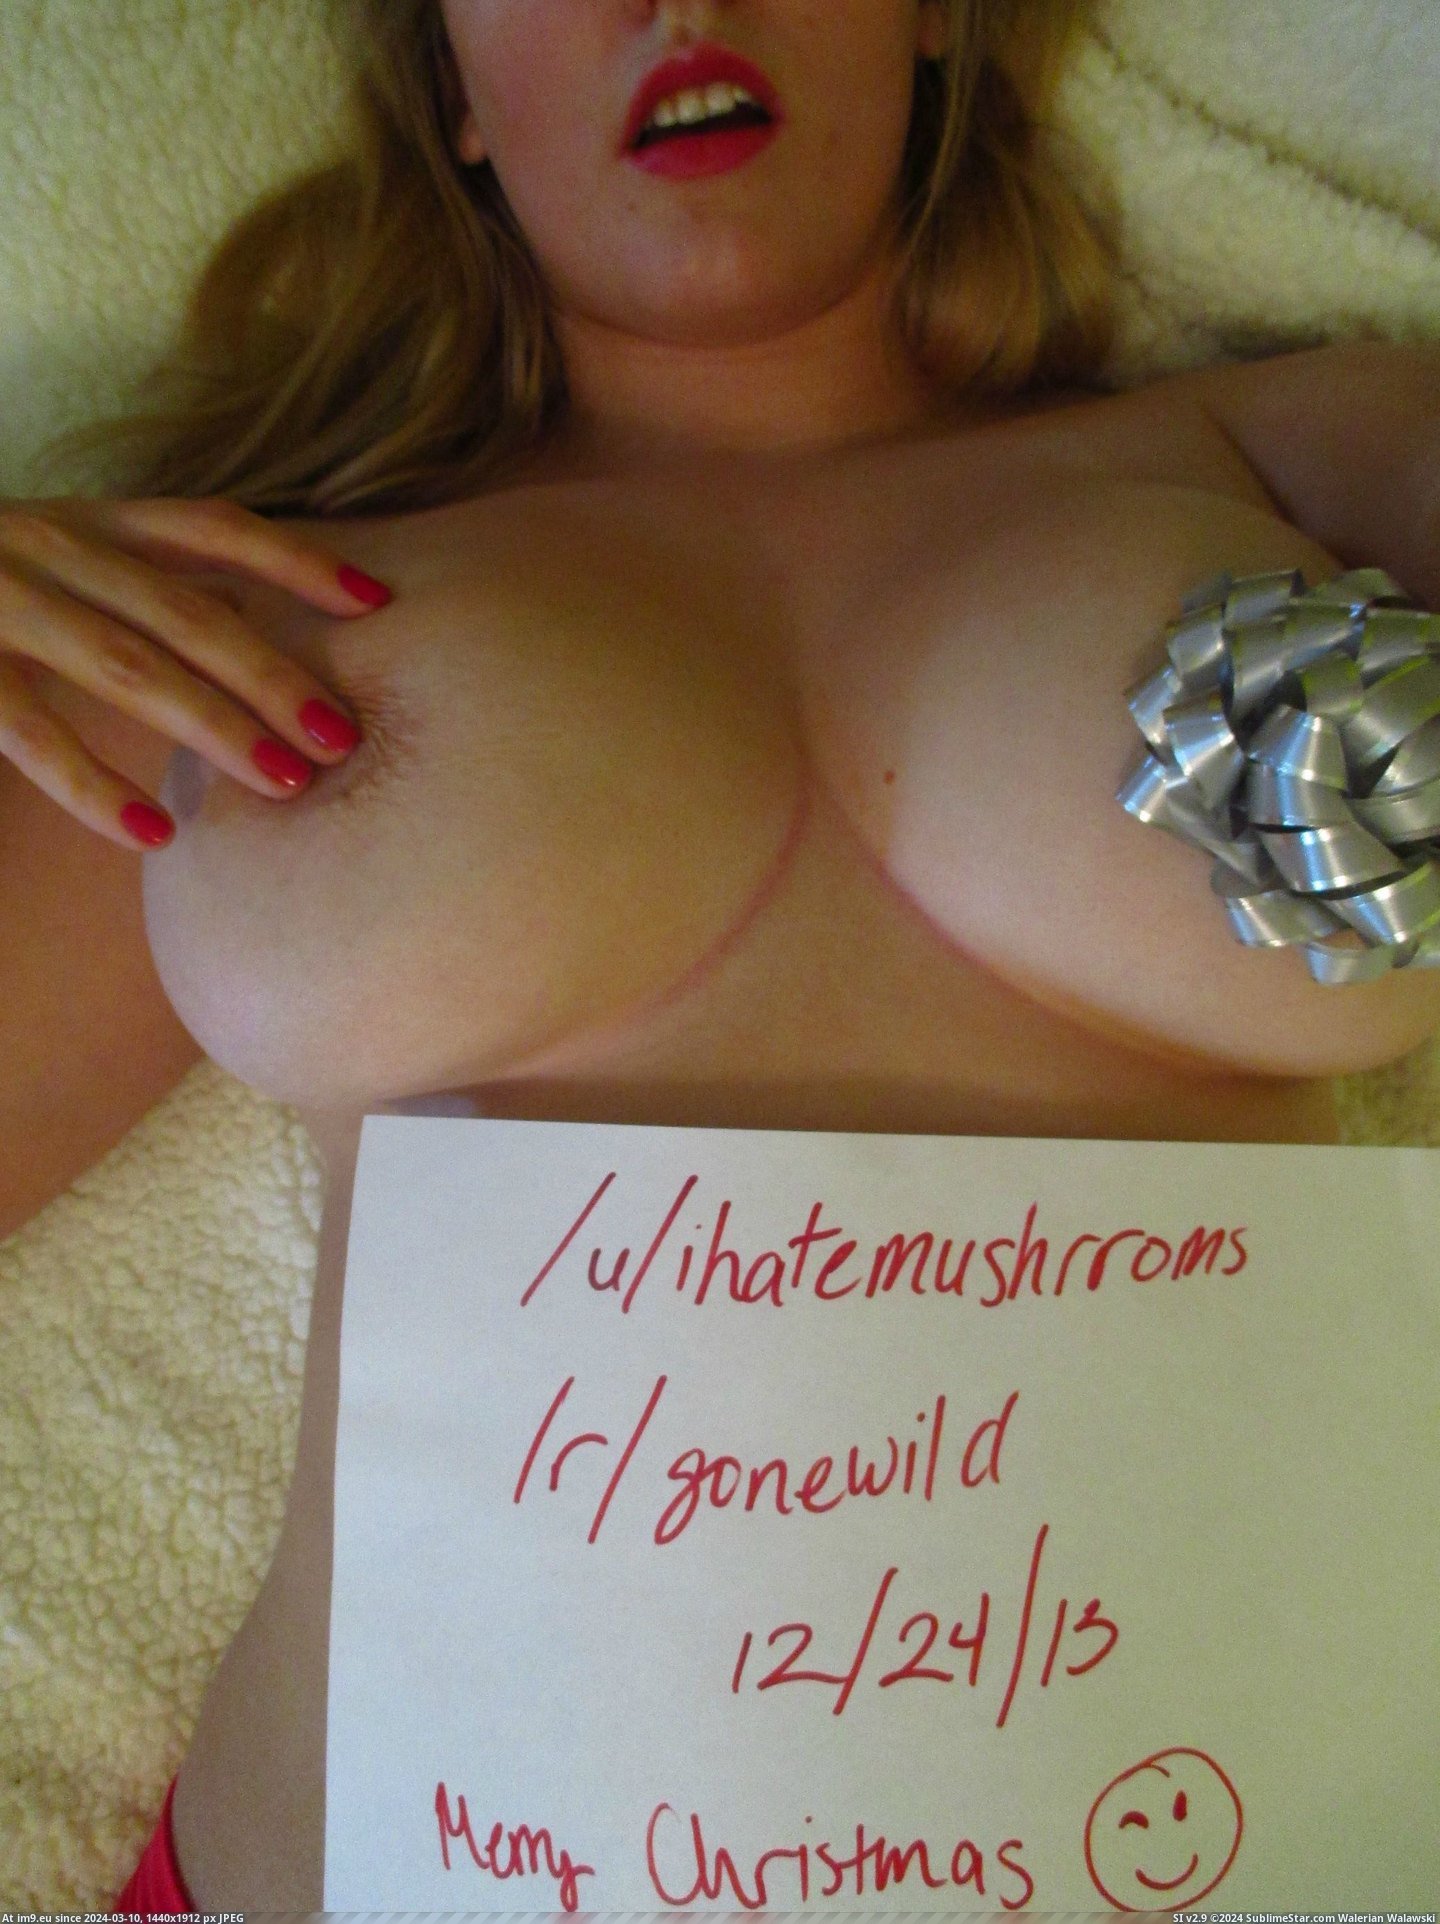 #For #Verification #Exchange #Downstairs #Peek #Unwrap [Gonewild] Who's up for a gi[f]t exchange? I'll unwrap myself for some verification (plus a little peek downstairs) 3 Pic. (Изображение из альбом My r/GONEWILD favs))